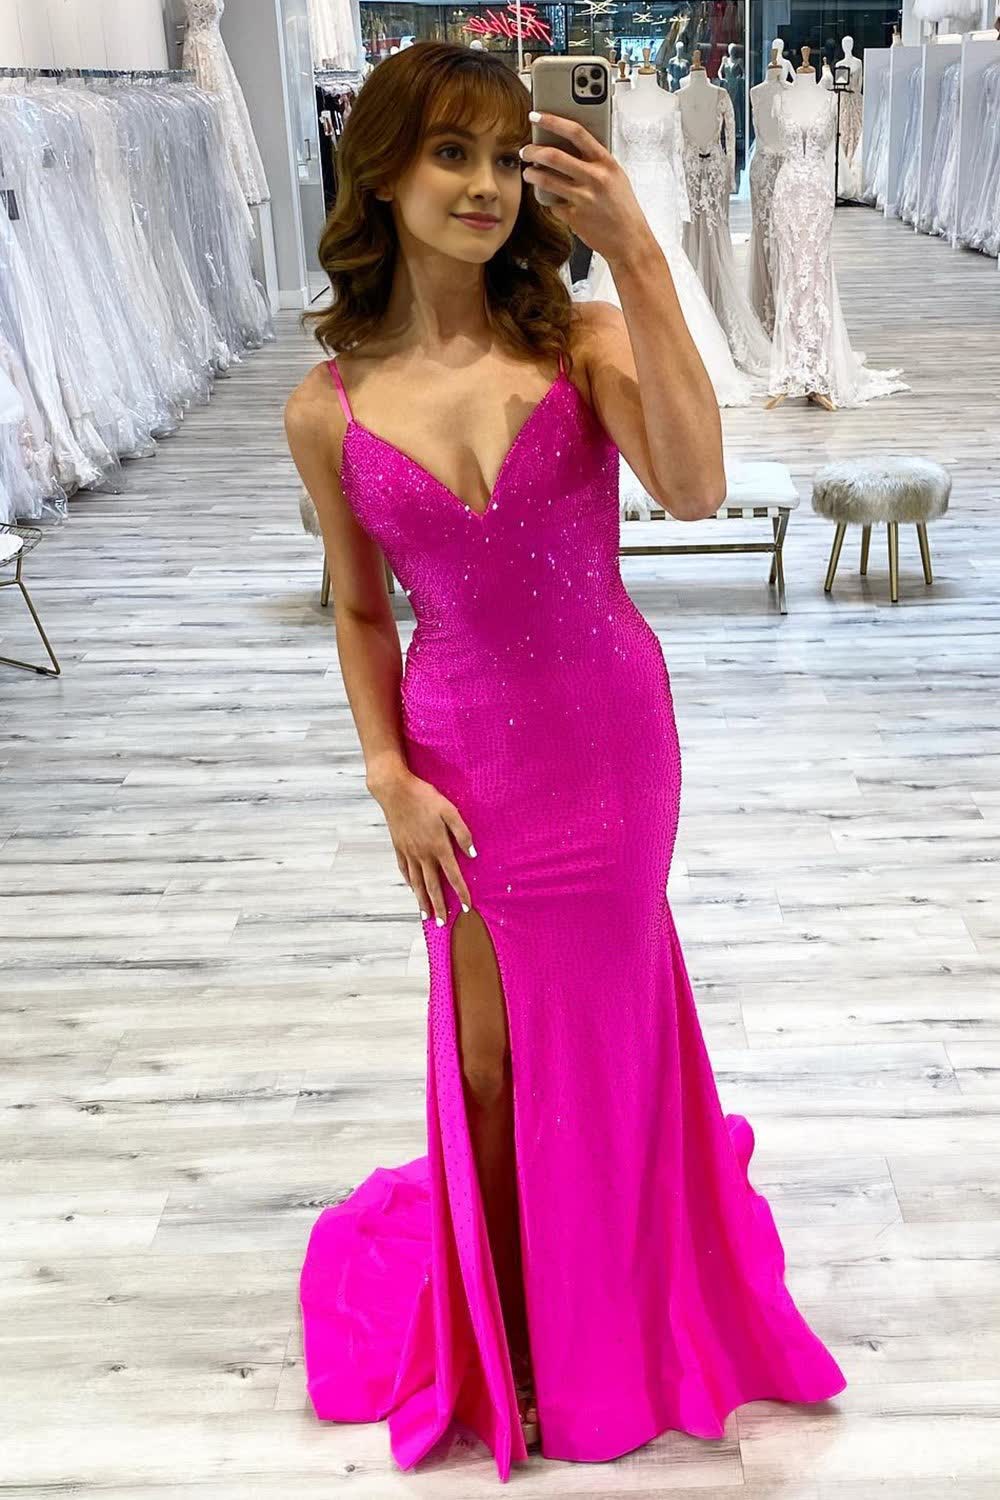 Sparkly Hot Pink Mermaid Sequins Long Corset Prom Dress with Slit Gowns, Sparkly Hot Pink Mermaid Sequins Long Prom Dress with Slit